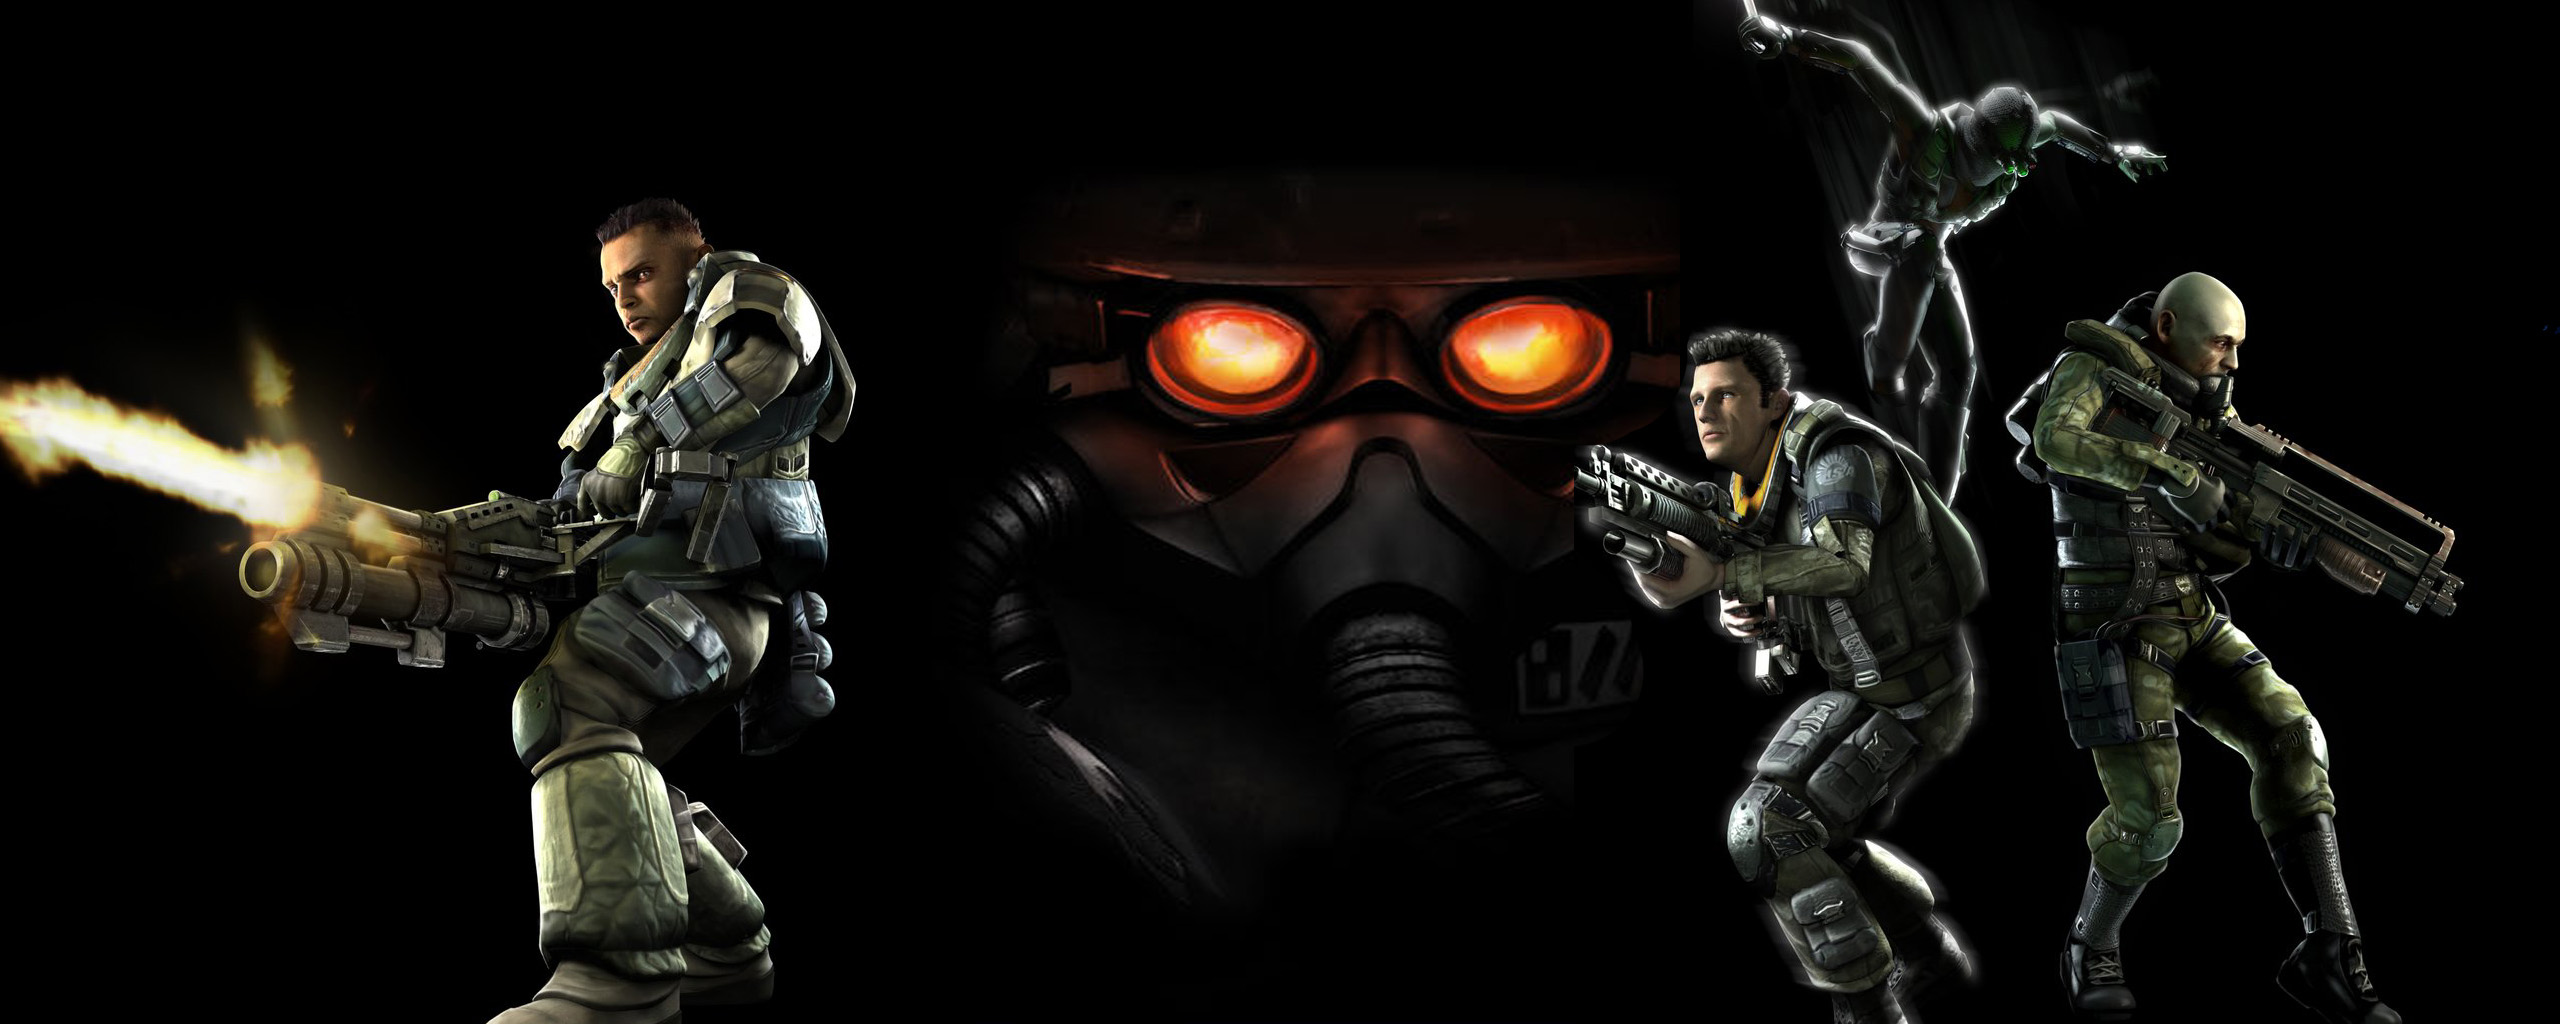 video game, killzone, soldier wallpaper for mobile